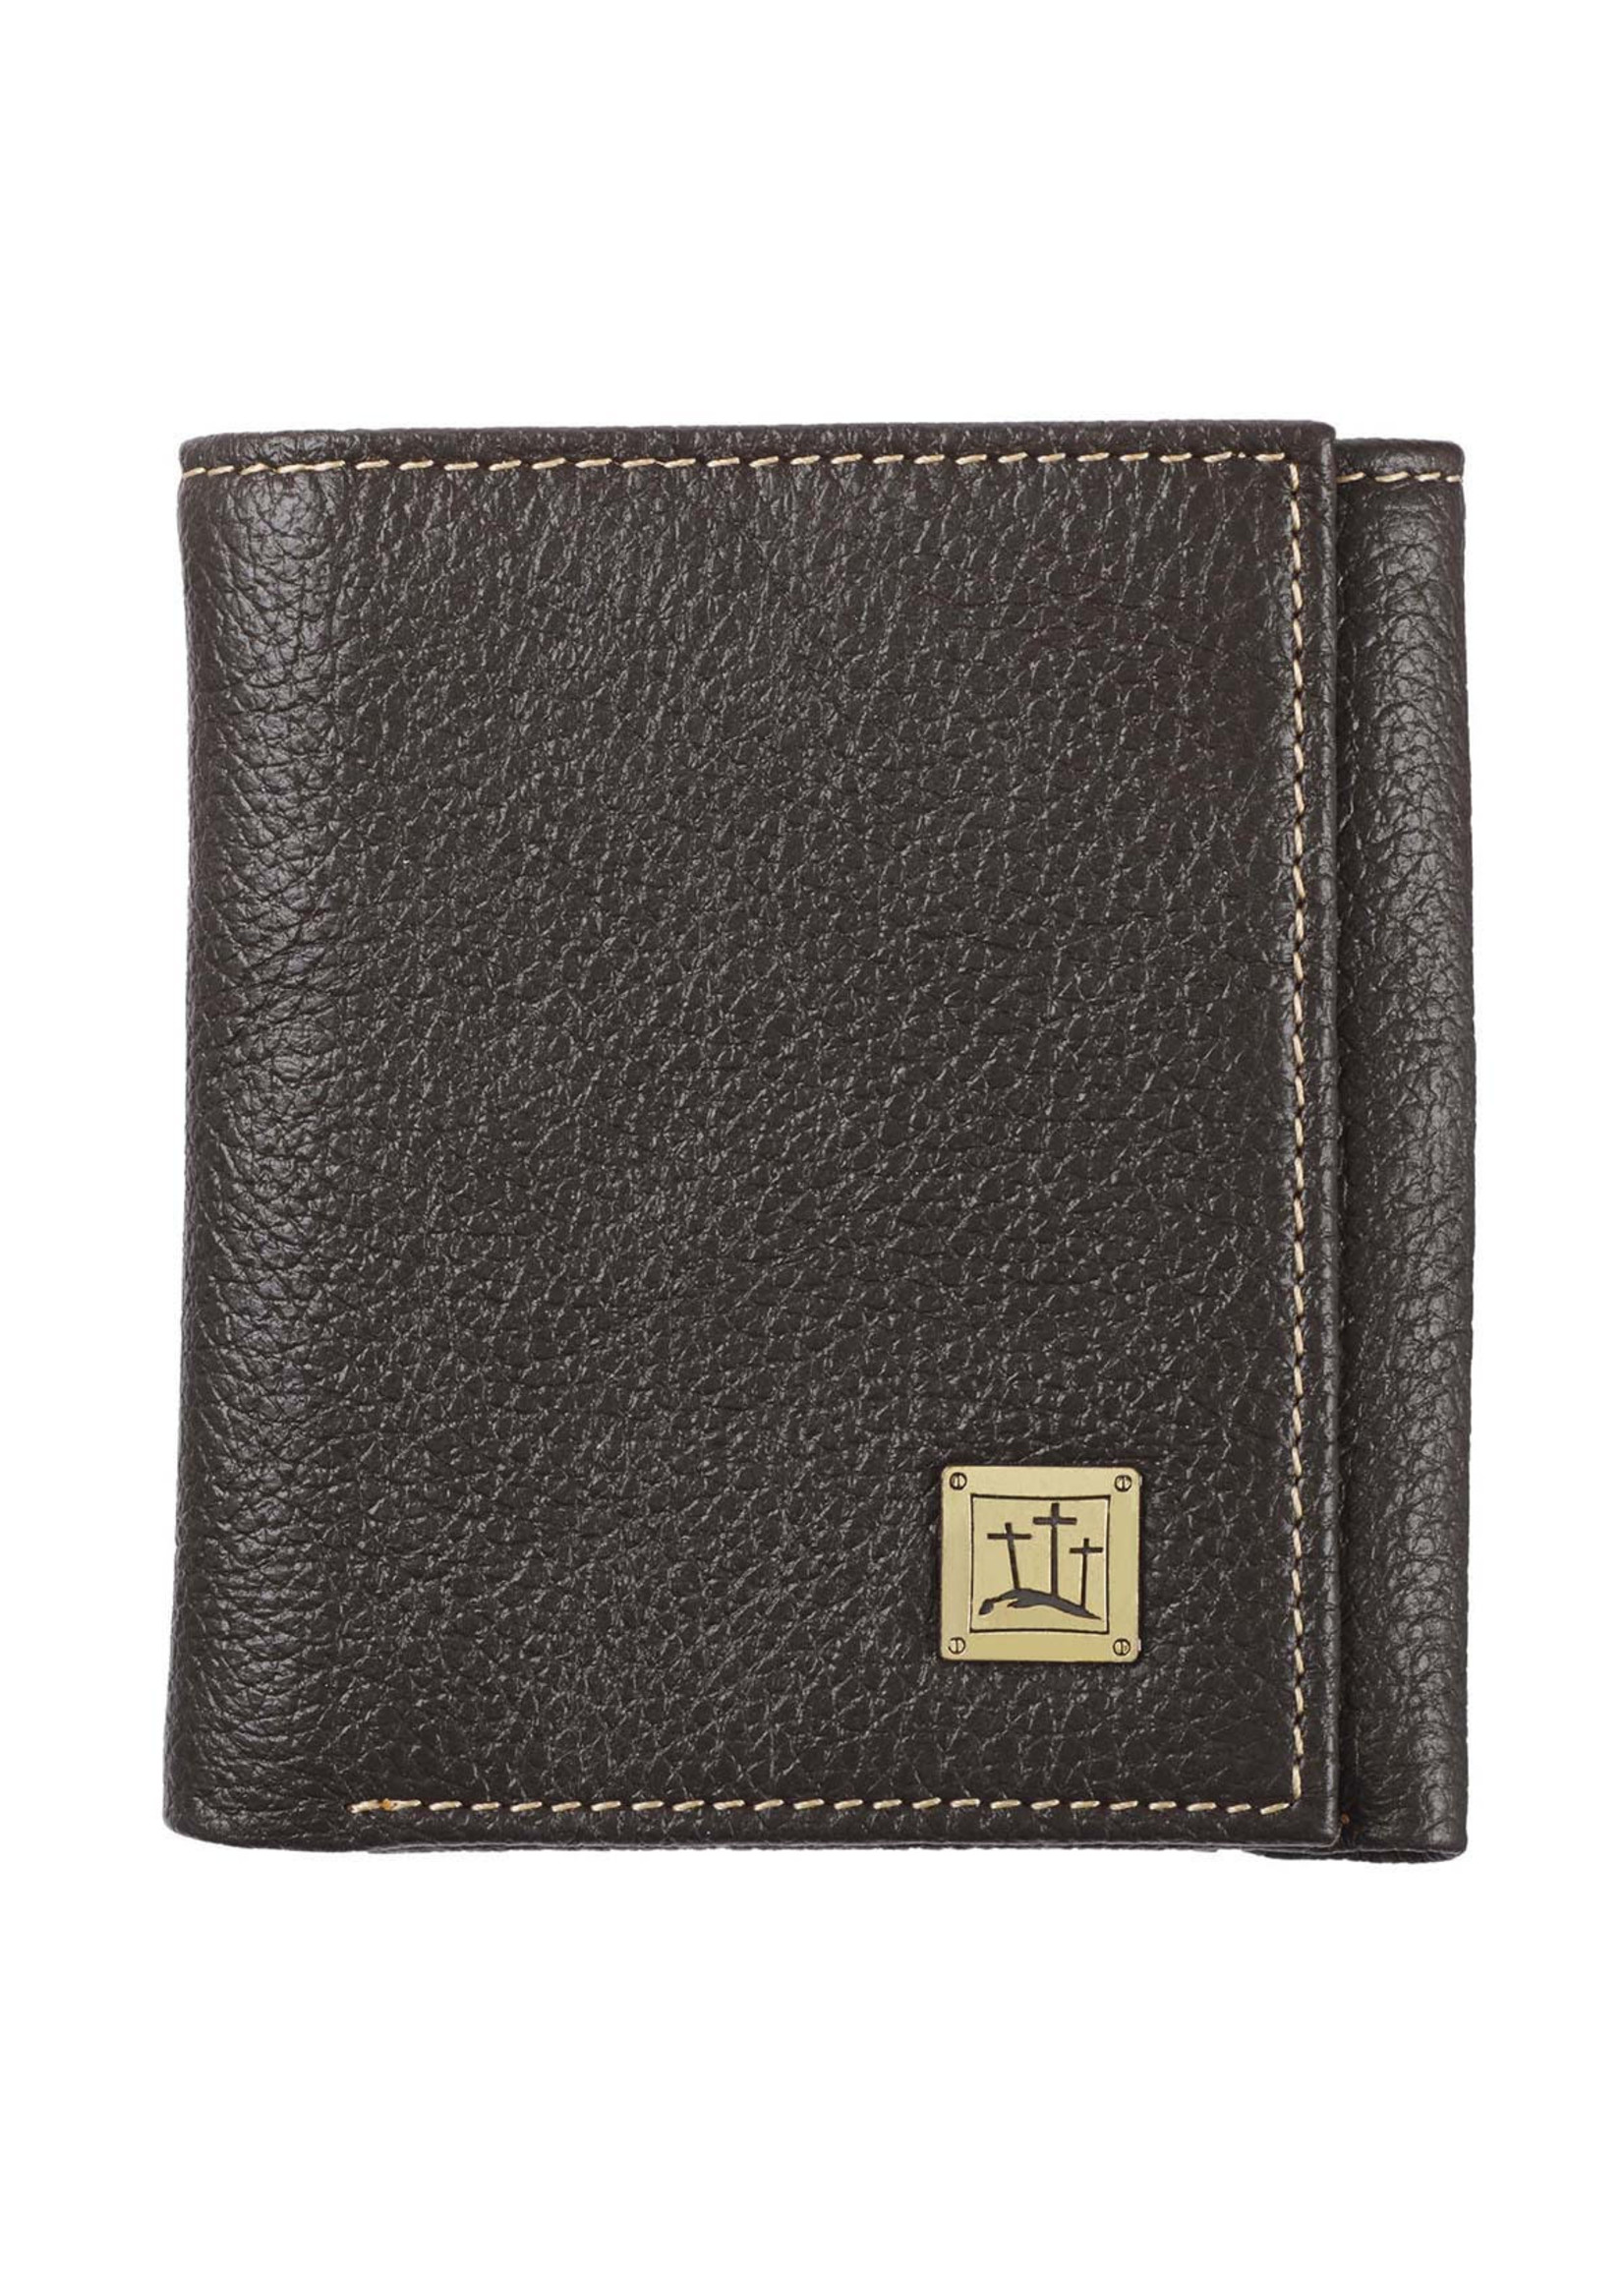 Christian Art Gifts Genuine Leather 3 Cross Wallet